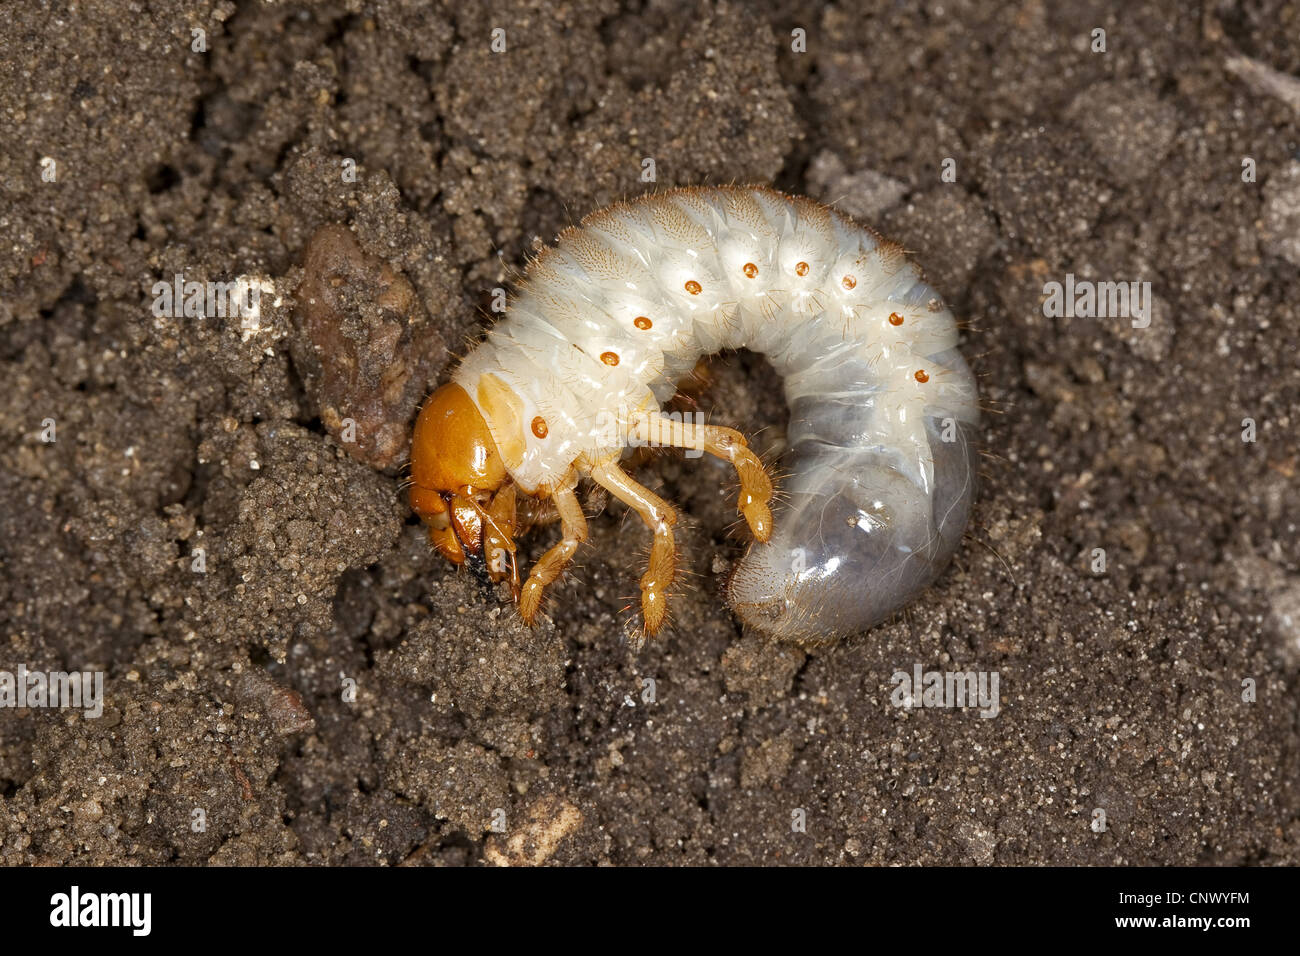 common cockchafer, maybug (Melolontha melolontha), larva in soil ground, Germany Stock Photo